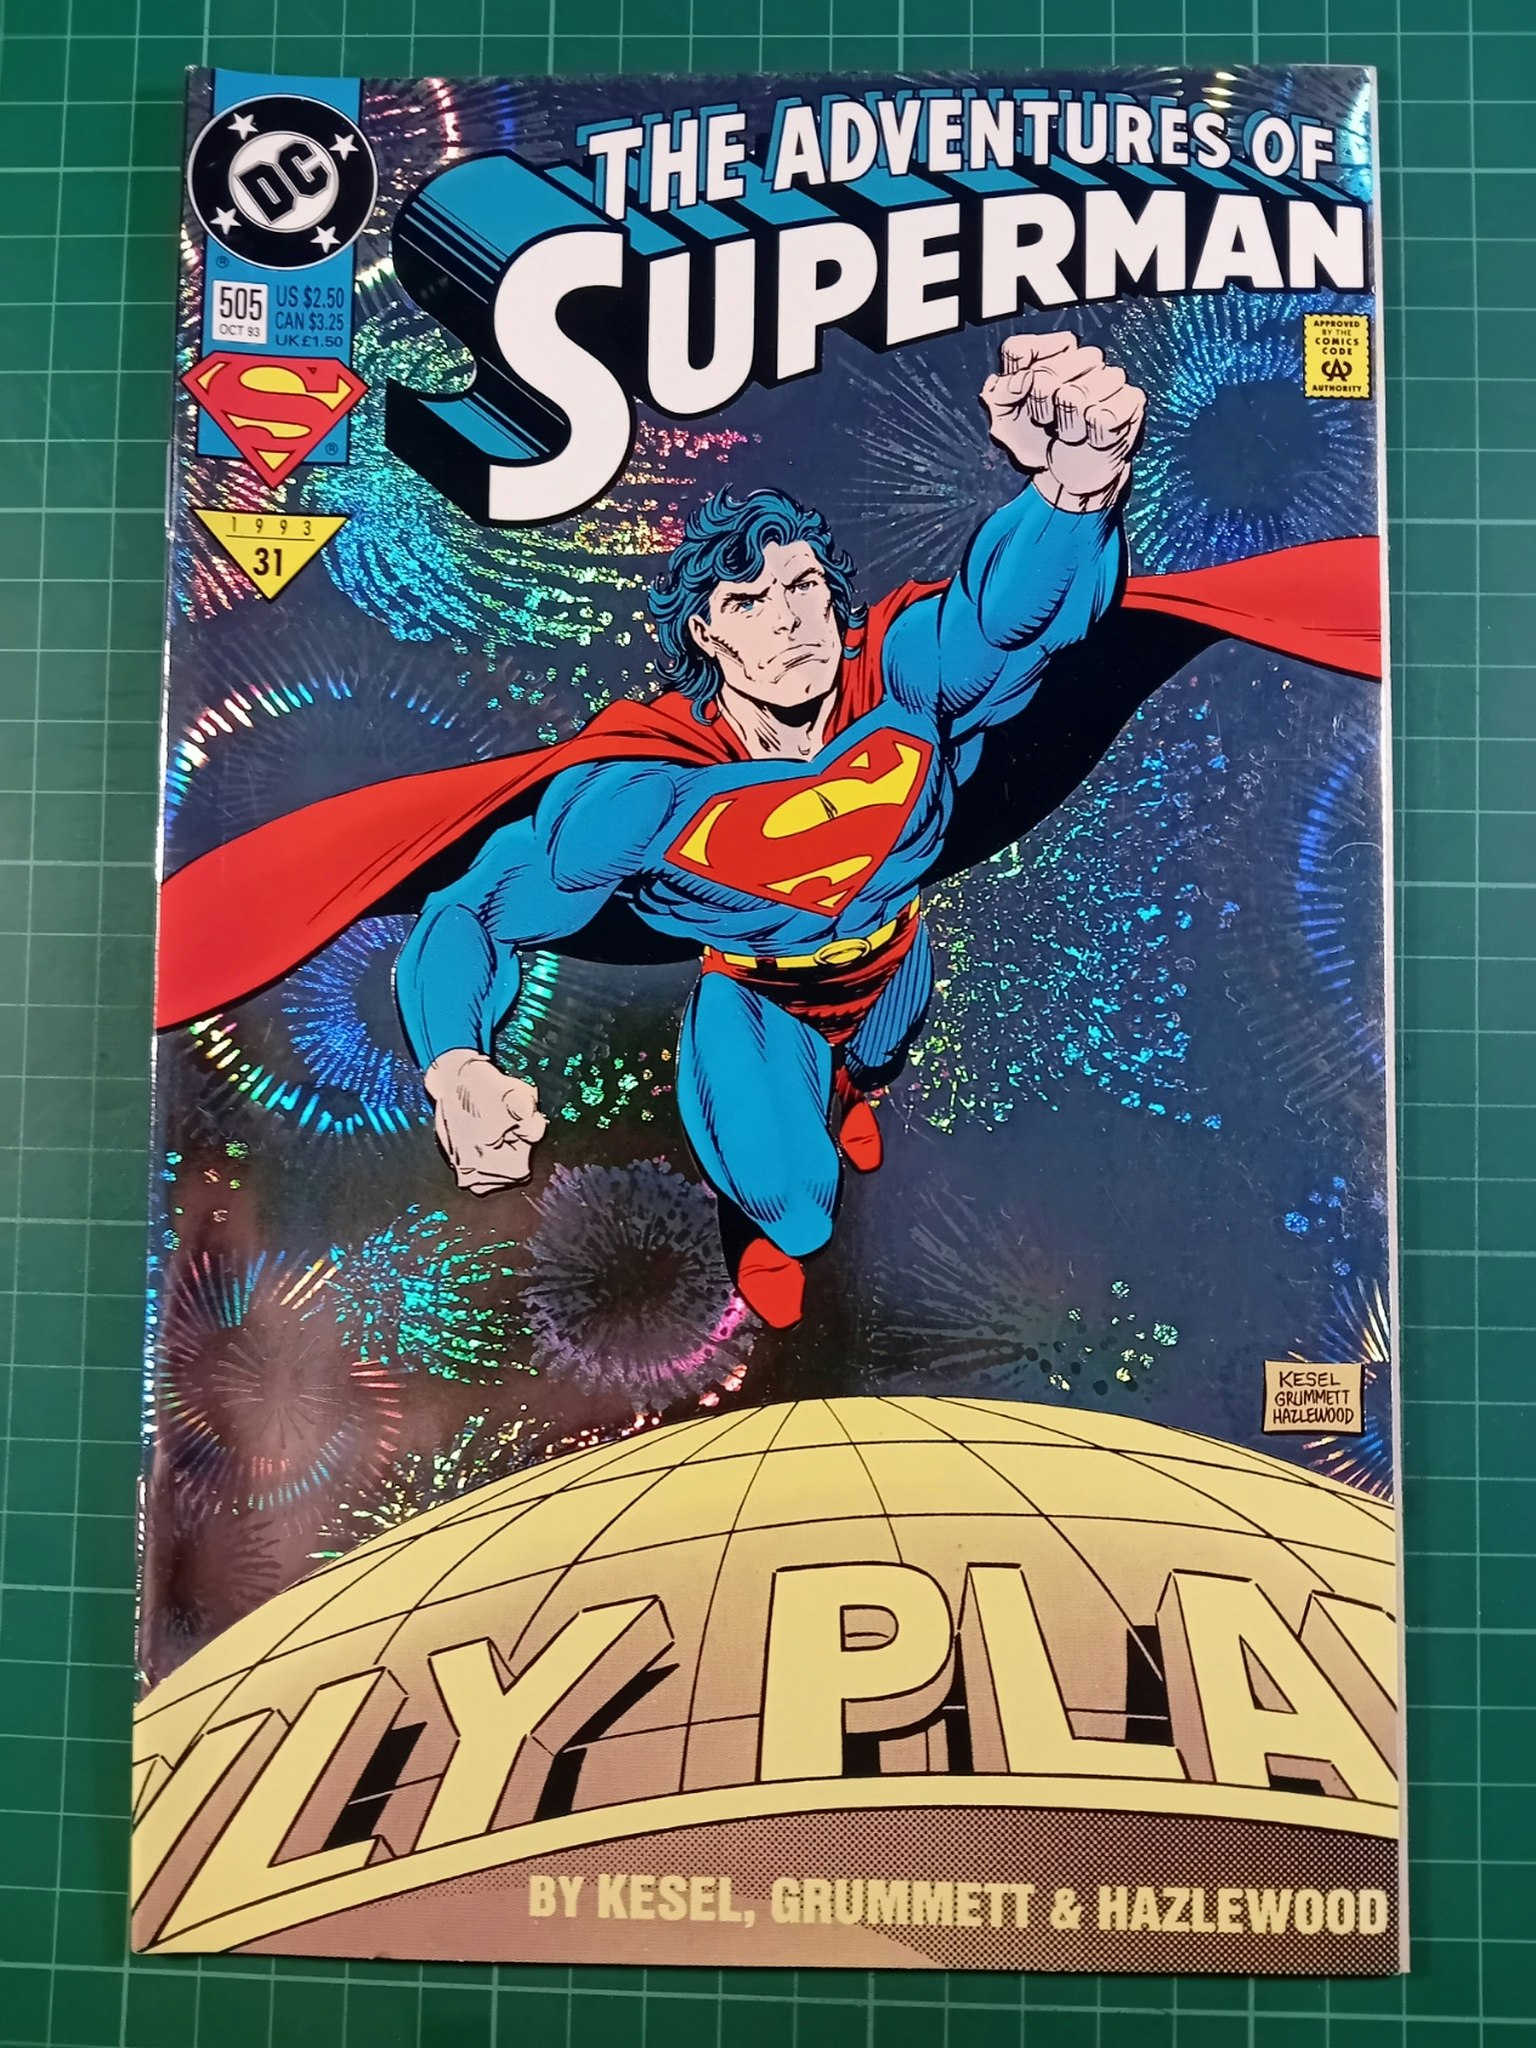 The adventures of Superman #505